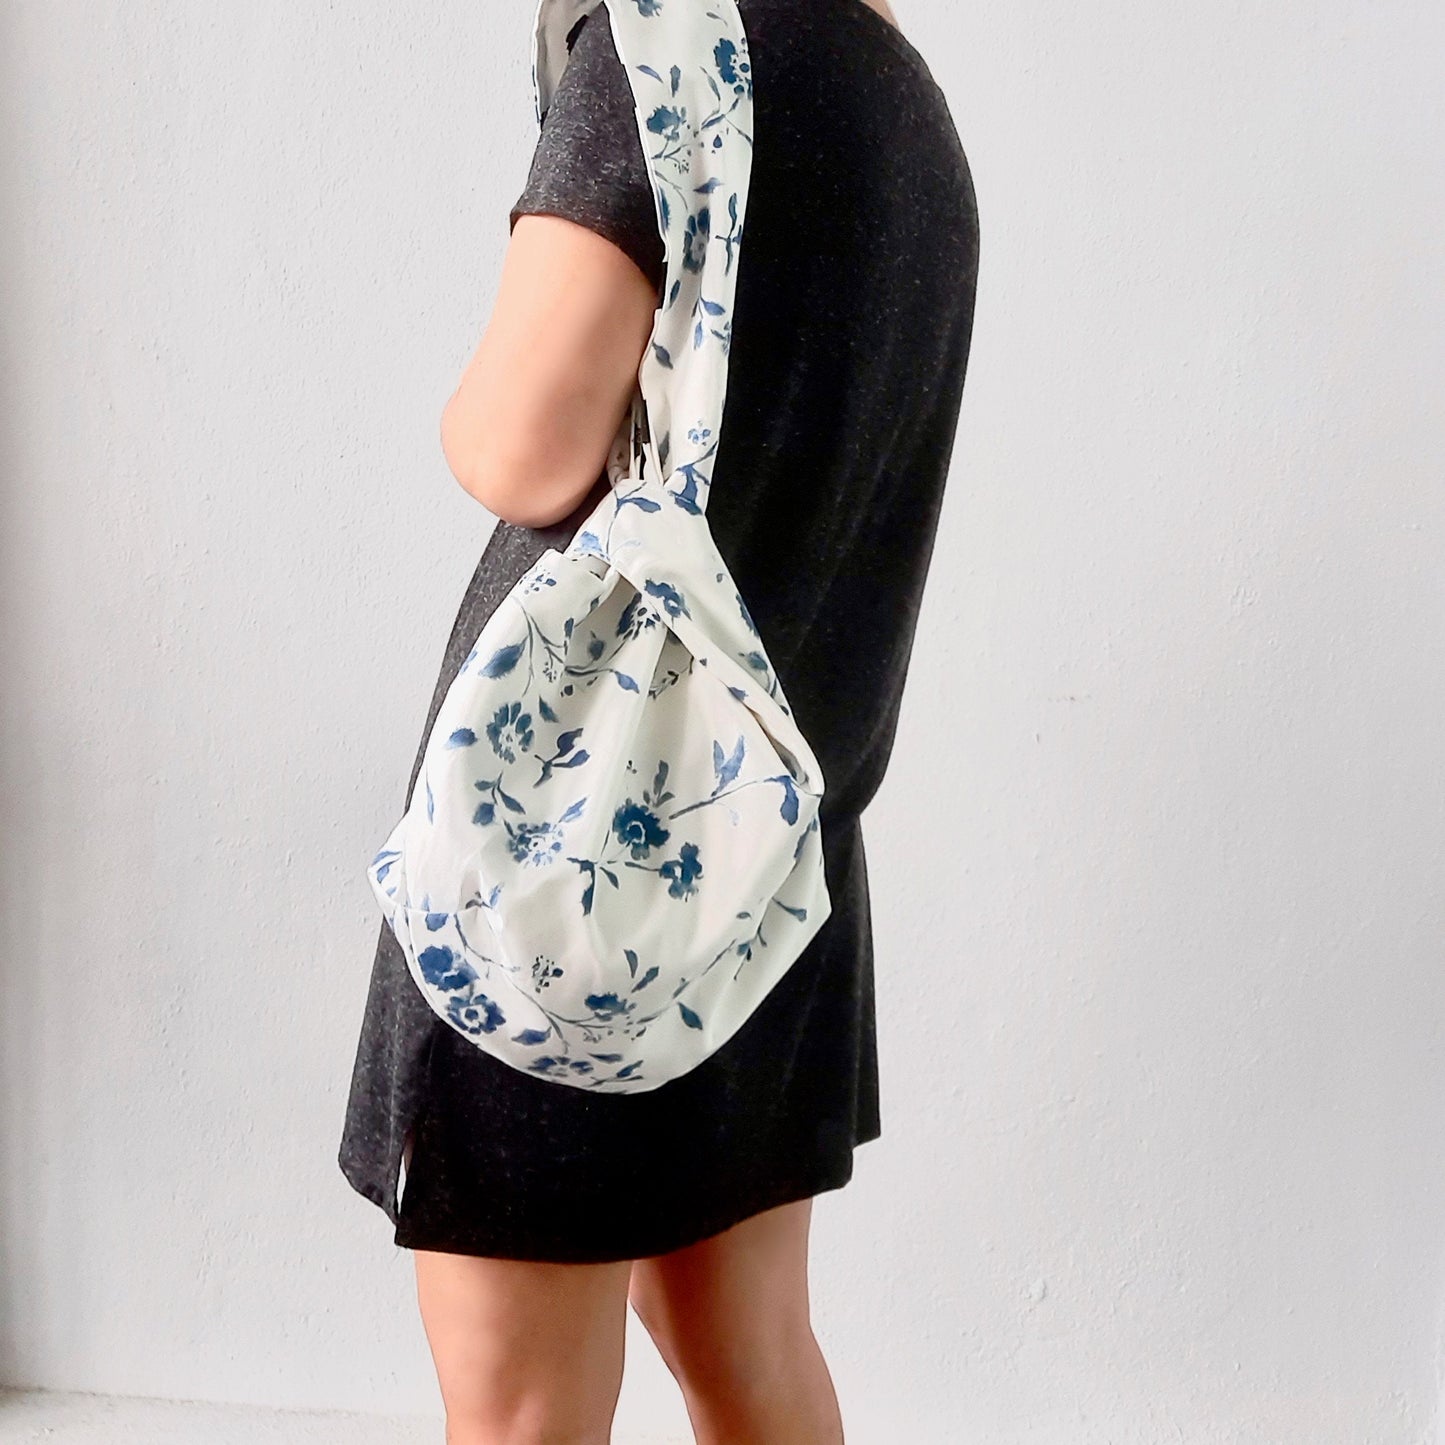 Reversible Knot Bag Pattern- 4 different sizes and style /Video Tutorial